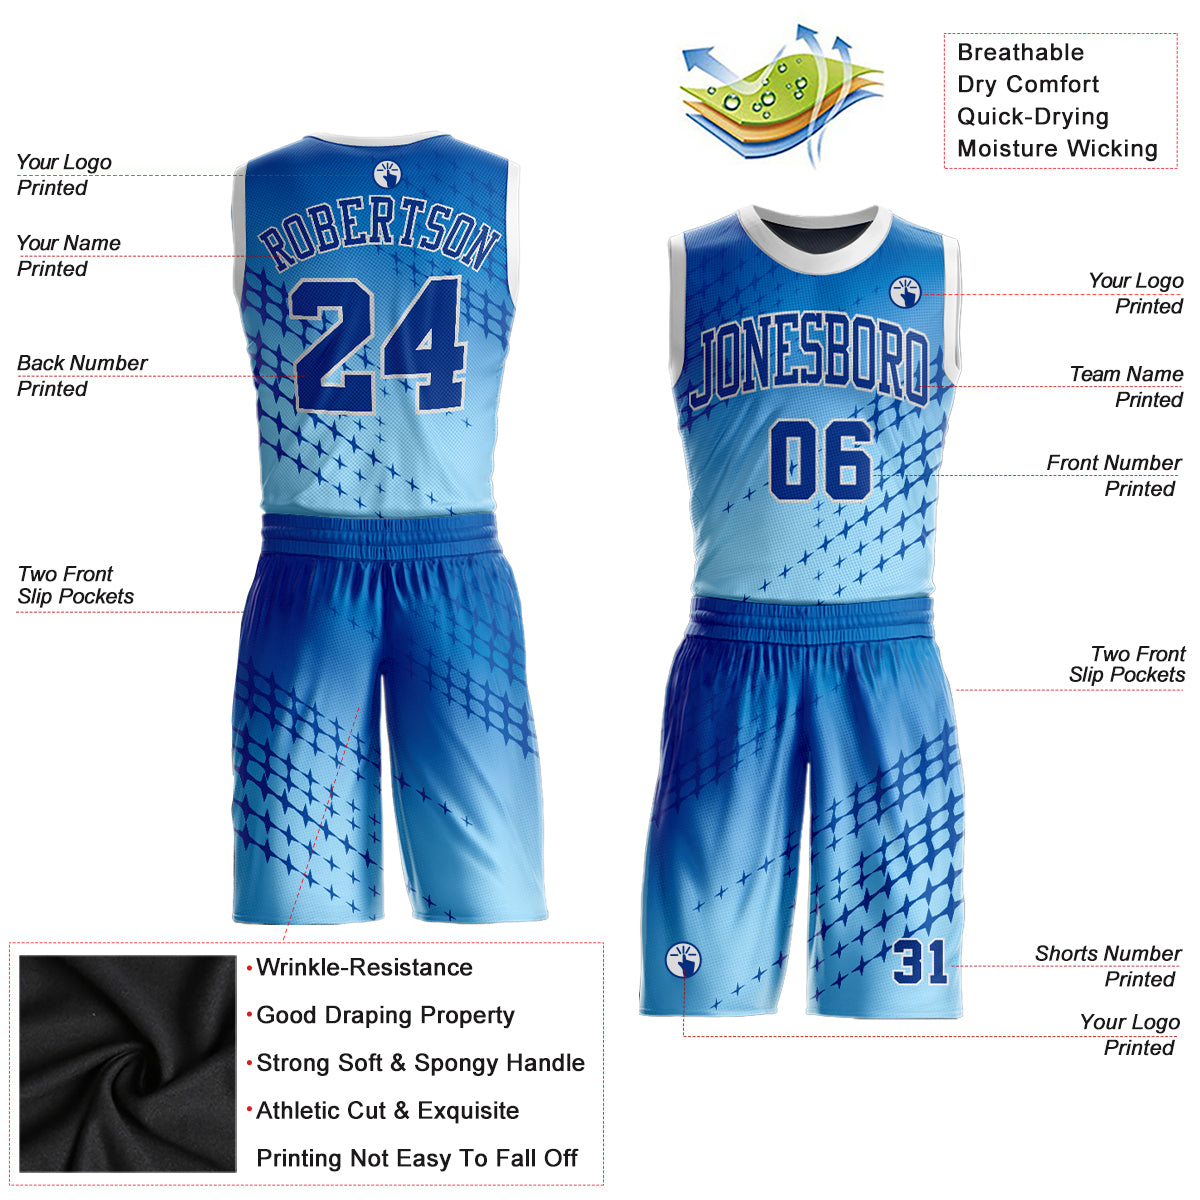 Custom Neon Green Navy Round Neck Sublimation Basketball Suit Jersey